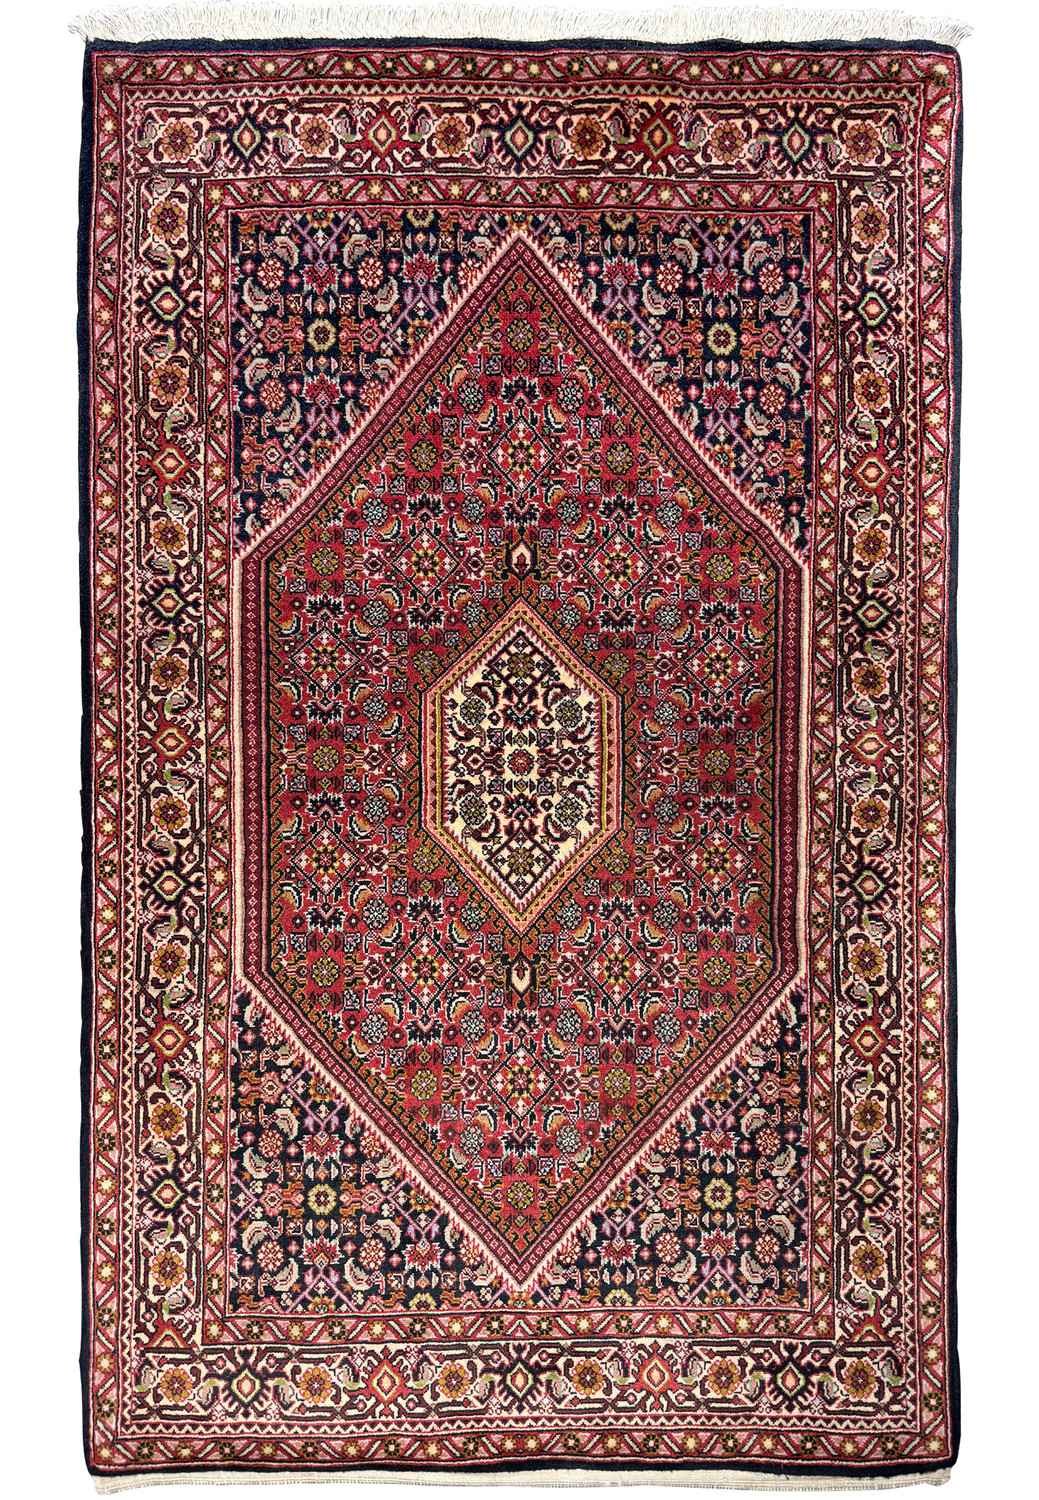 3x5 Persian Bidjar Rug with dominant burgundy field and navy central medallion, showcasing dense floral patterns and a traditional Herati border.